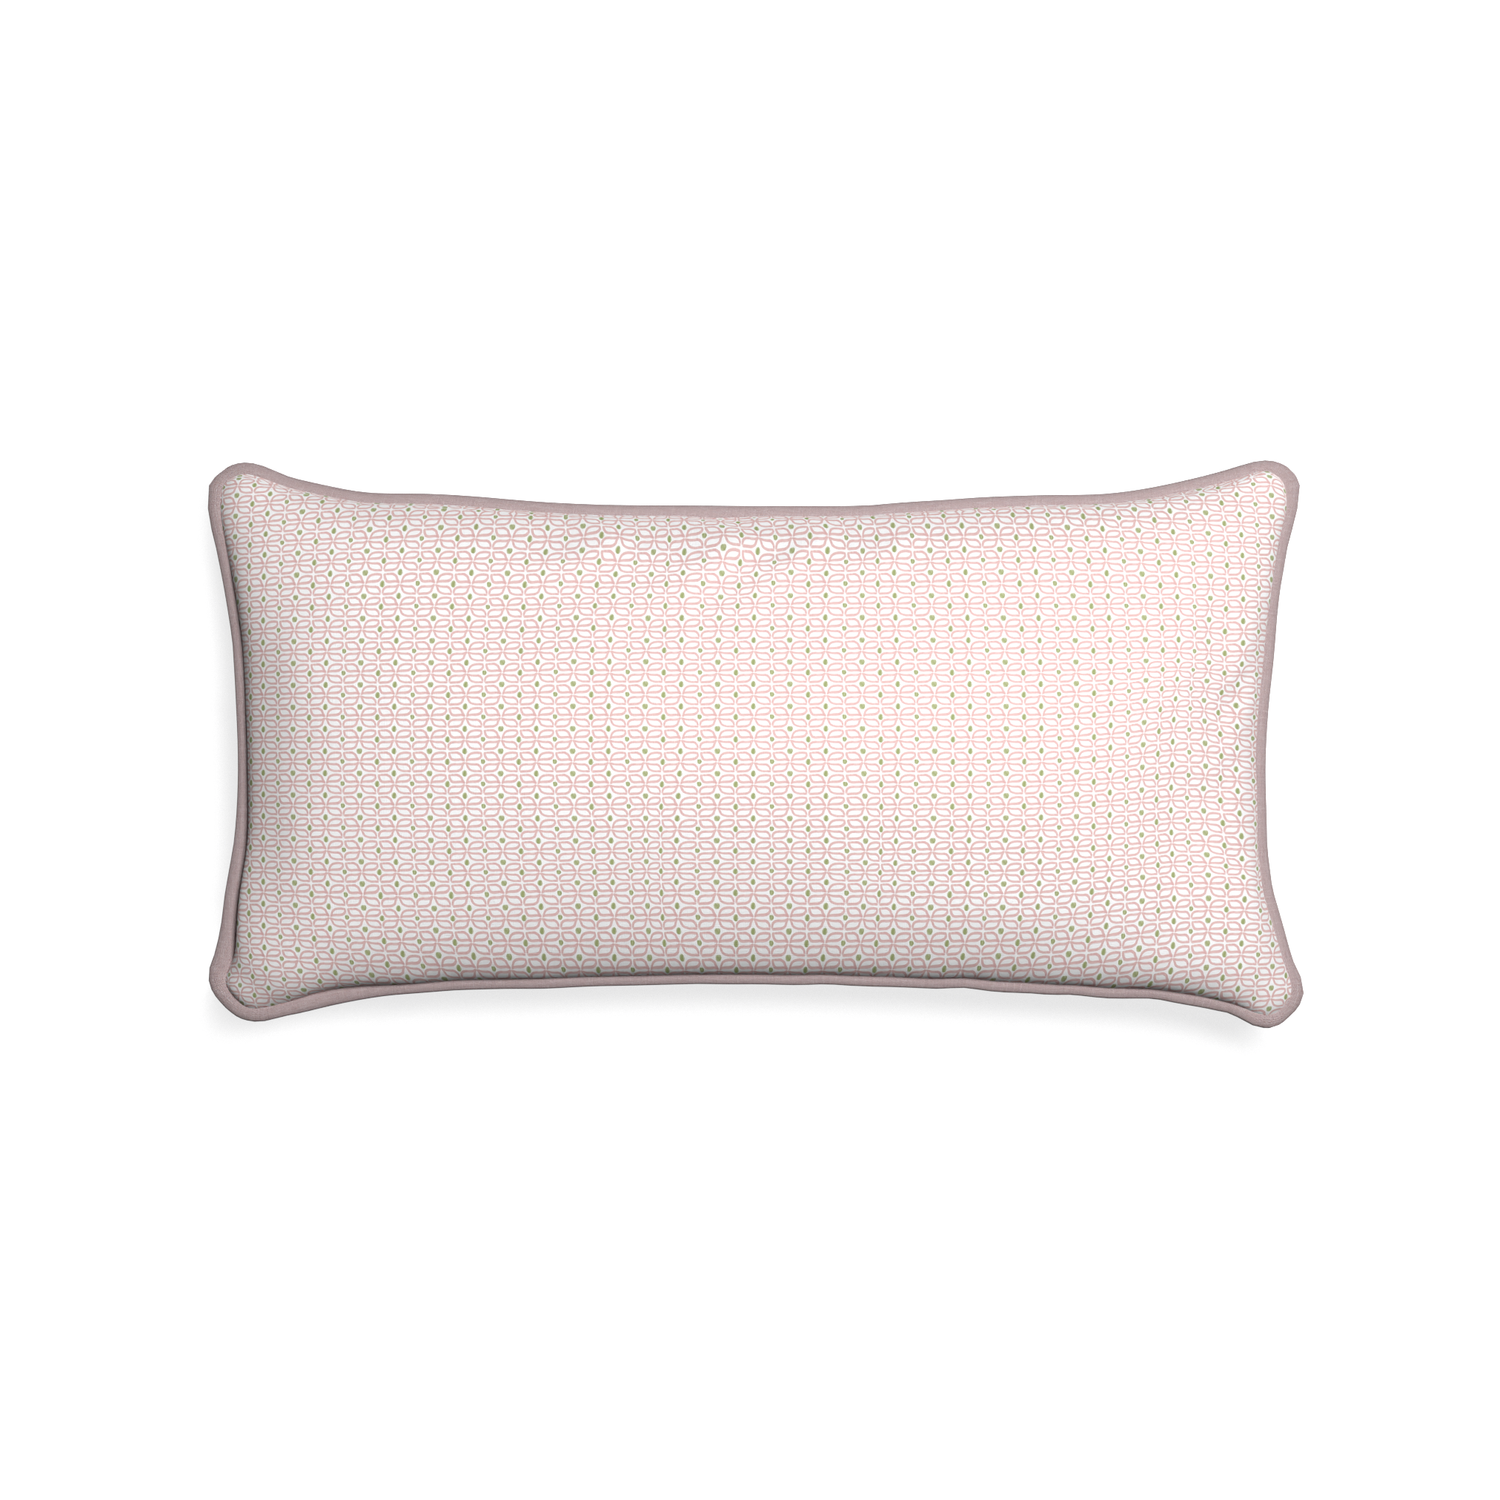 Midi-lumbar loomi pink custom pink geometricpillow with orchid piping on white background